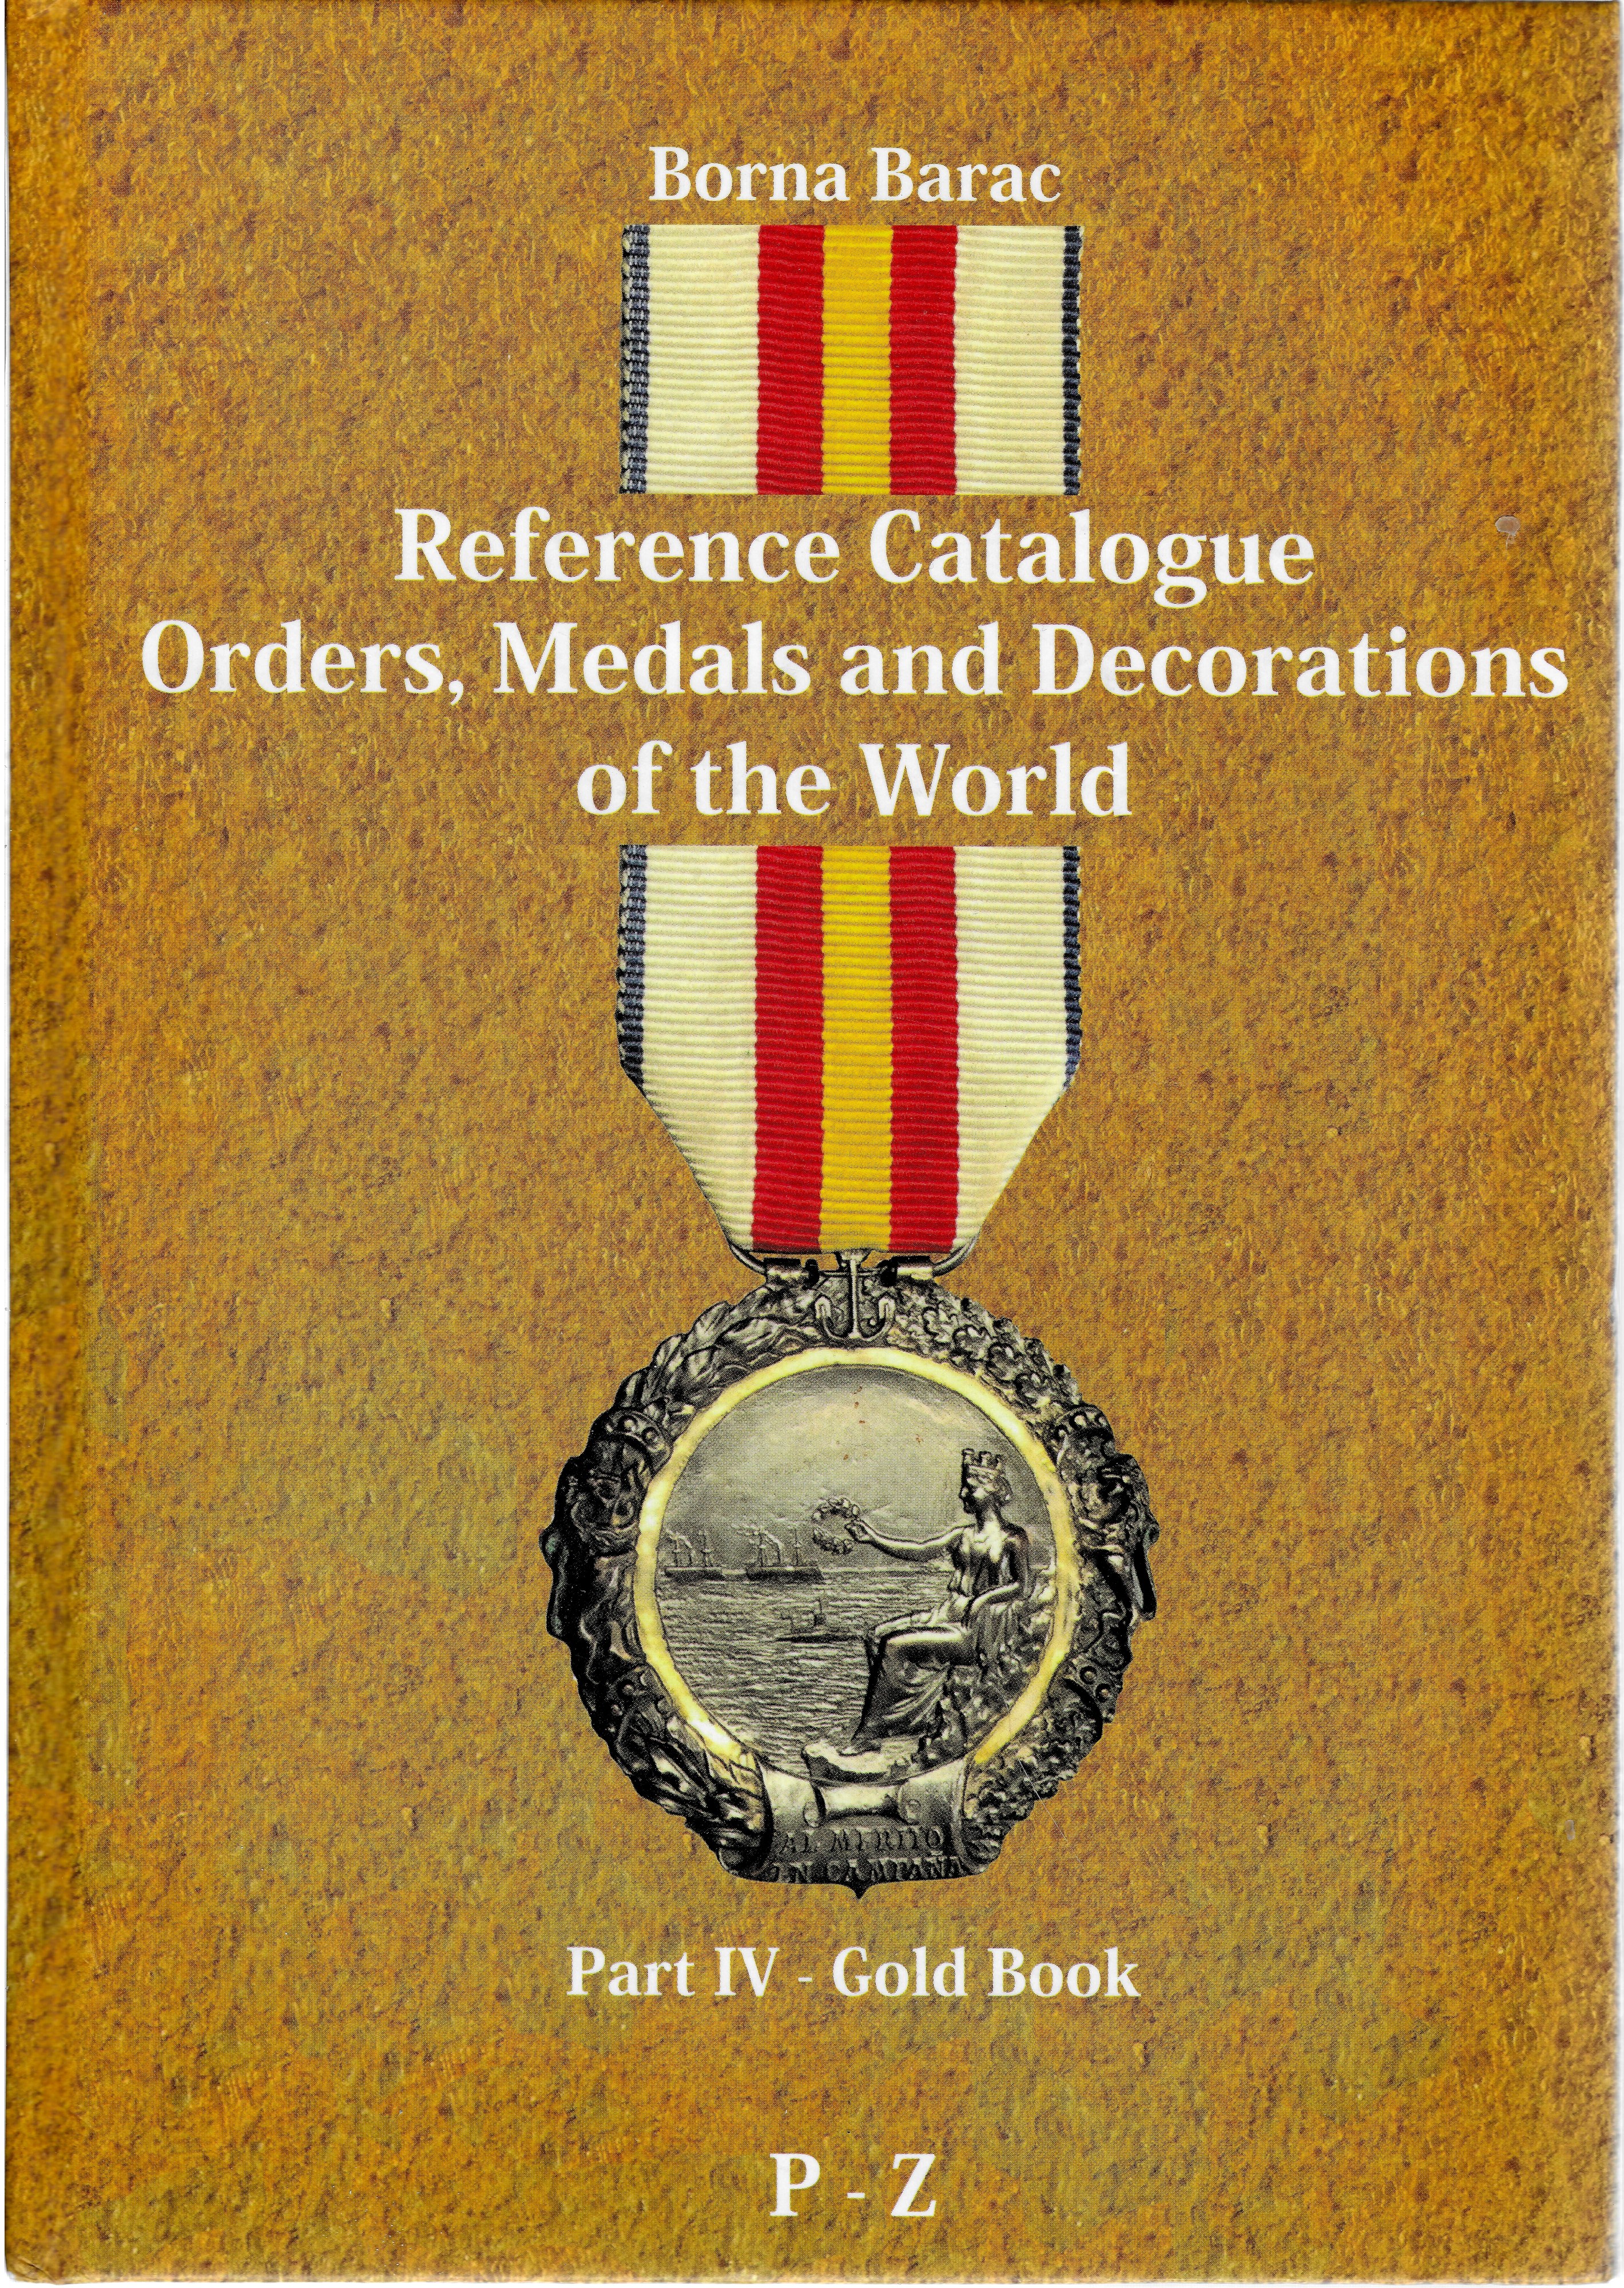 Catalogue reference. Orders medals